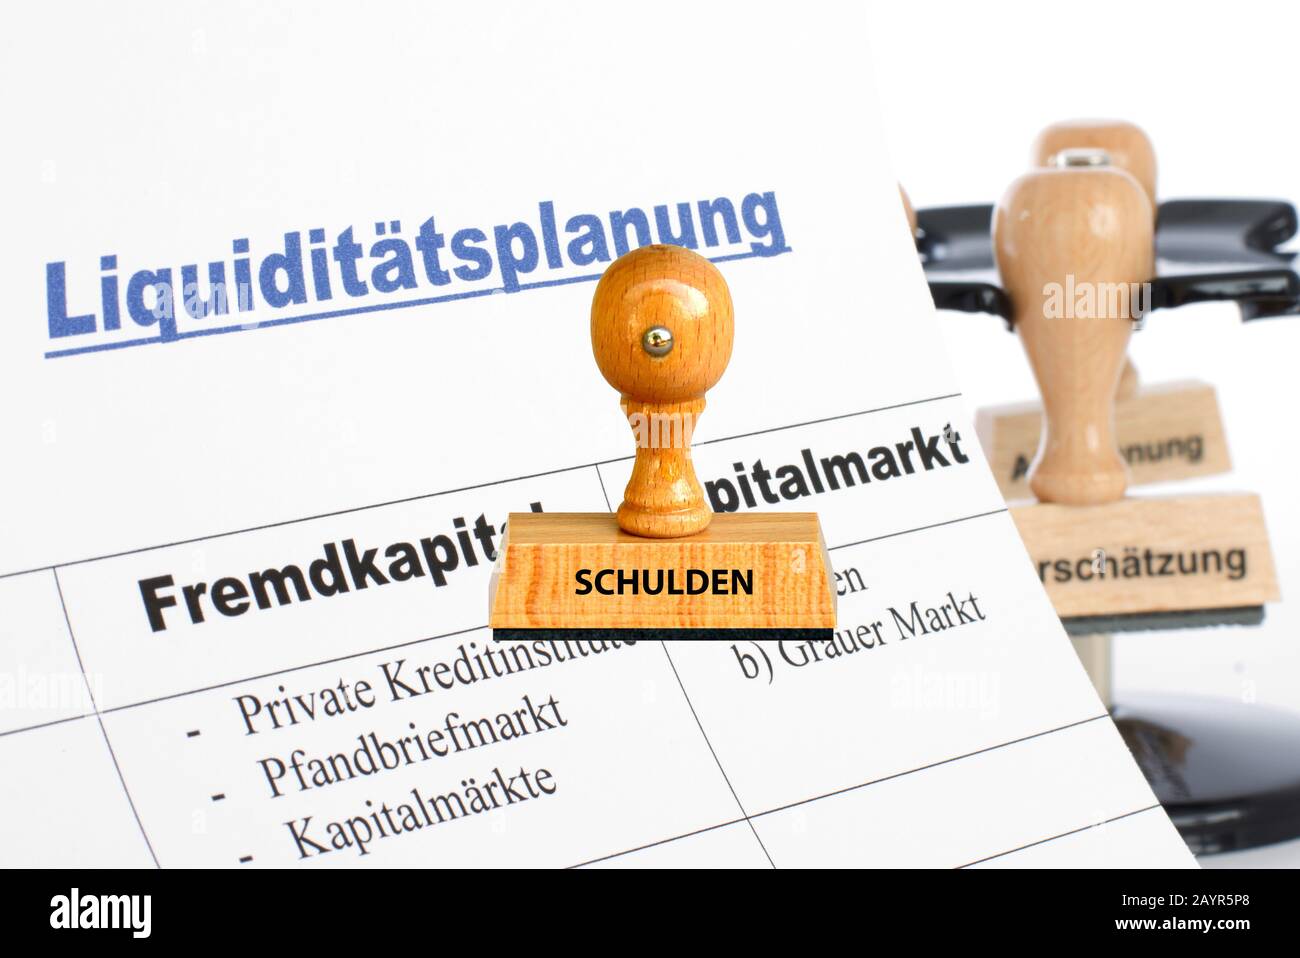 stamp lettering Schulden, credit, Germany Stock Photo